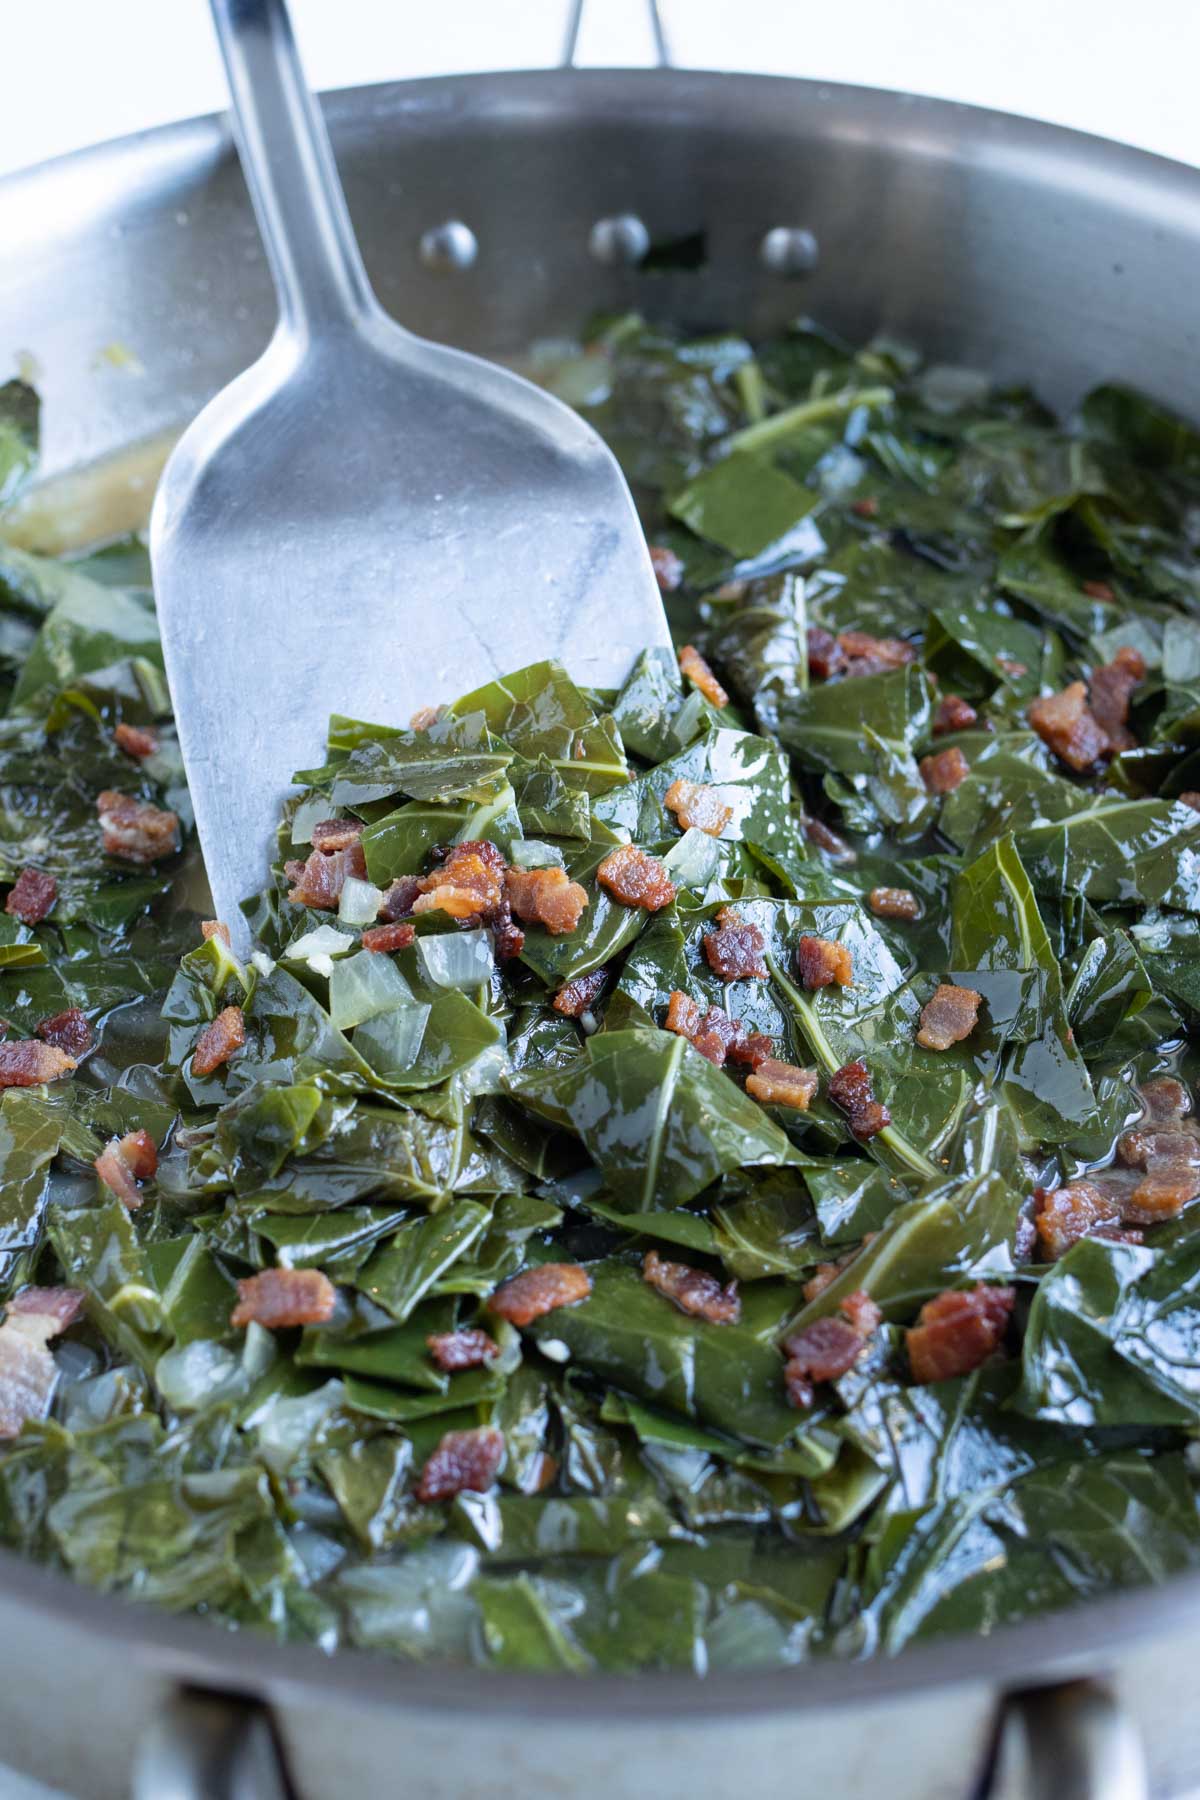 A pan in shown with cooked southern collard greens and bacon.